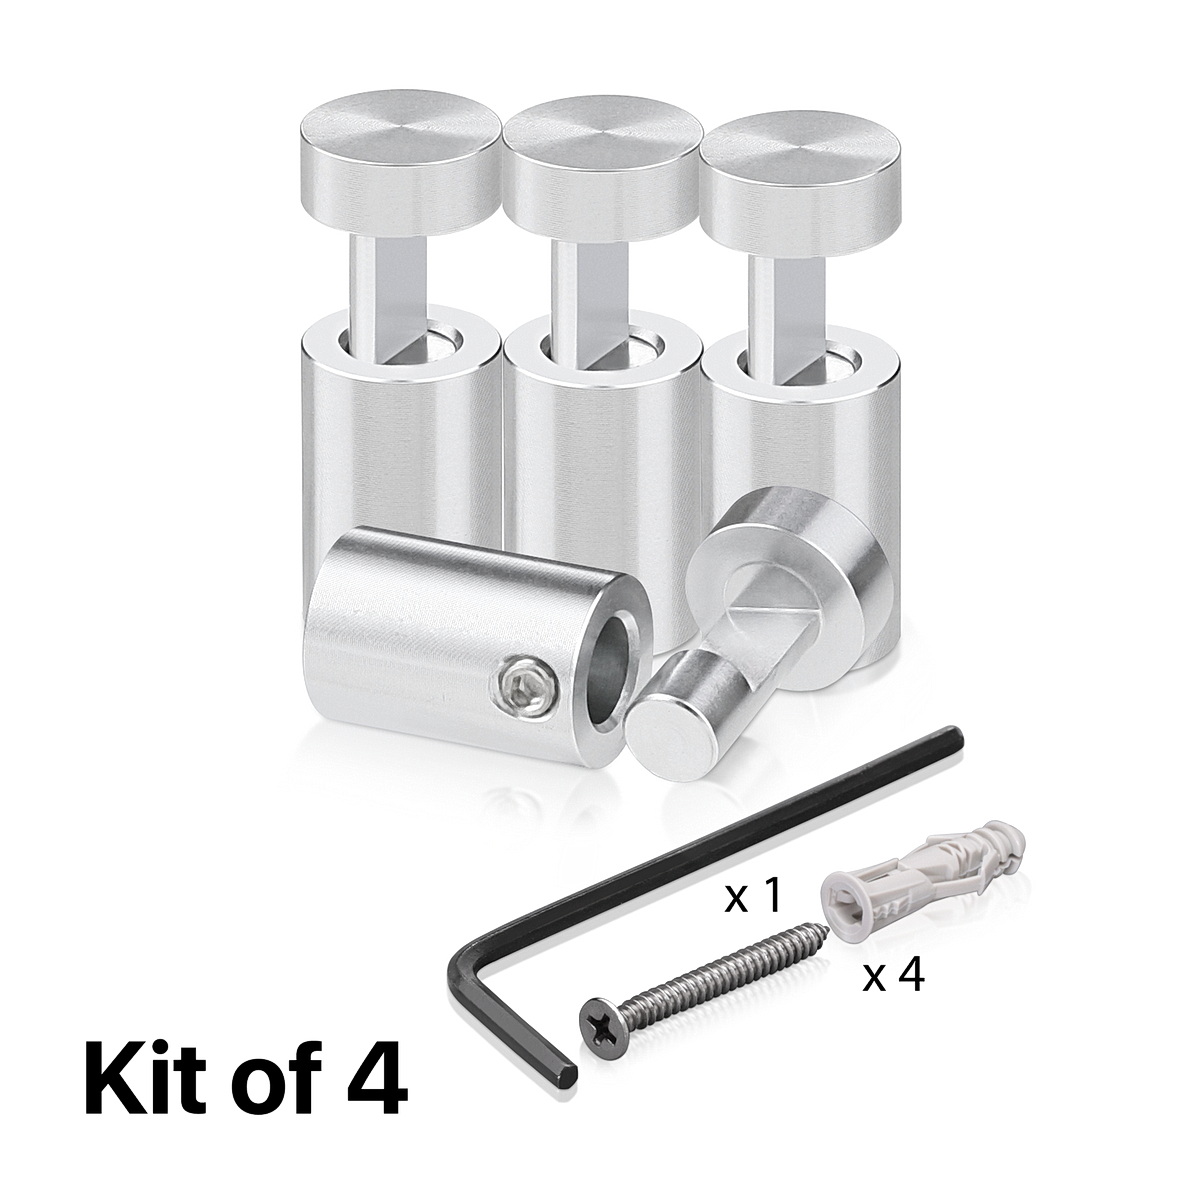 (Set of 4) 1/2'' Diameter X 3/4'' Barrel Length, Aluminum Clear Shiny Anodized Finish. Adjustable Edge Grip Standoff with (4) 2208Z Screw and (4) LANC1 Anchor  for concrete/drywall (For Inside Use Only)